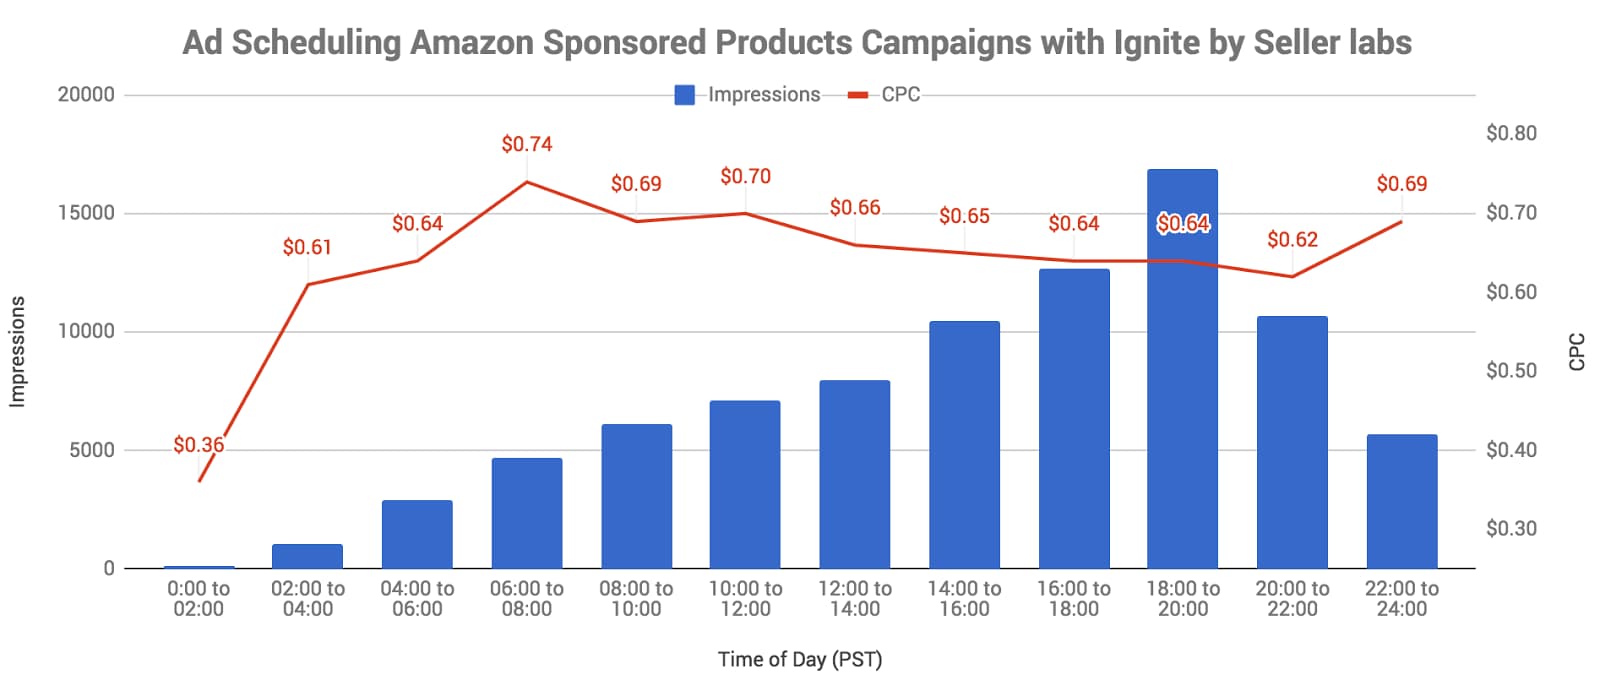 Ad Scheduling Amazon Sponsored Products Campaigns with Ignite by Seller Labs